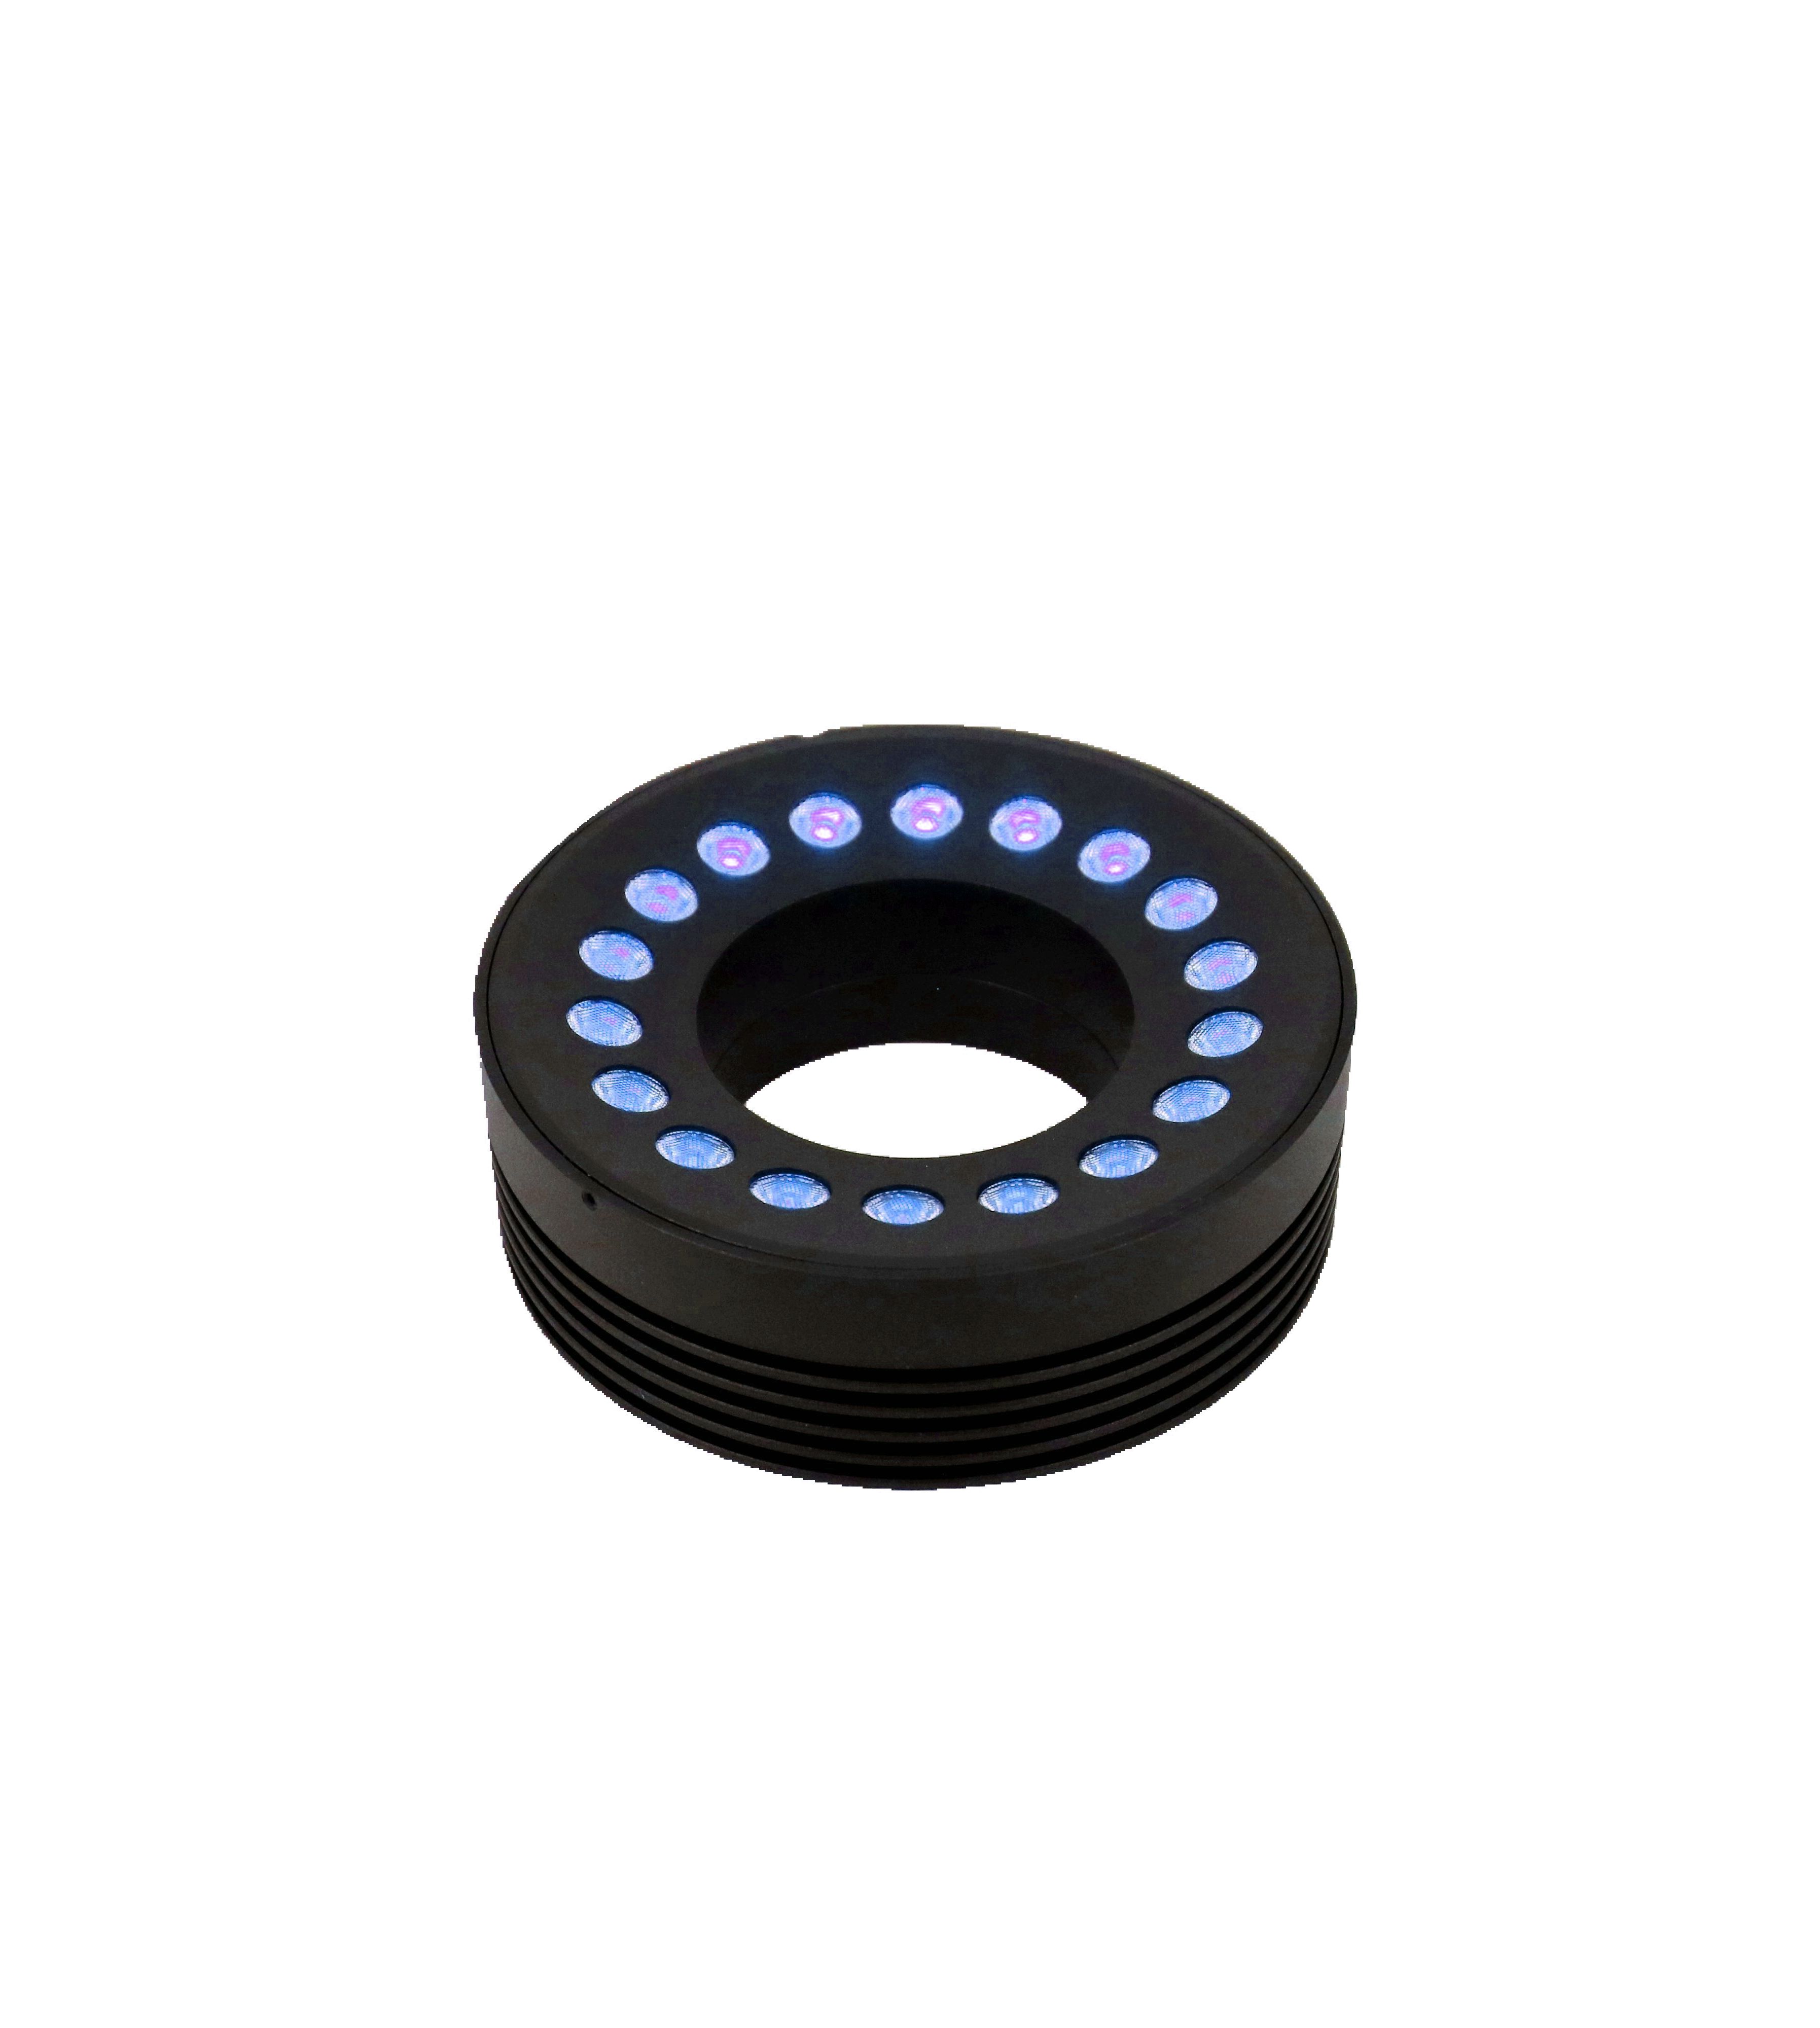 DRC-120/60 Direct Ring Series with High Power Illumination – Blue